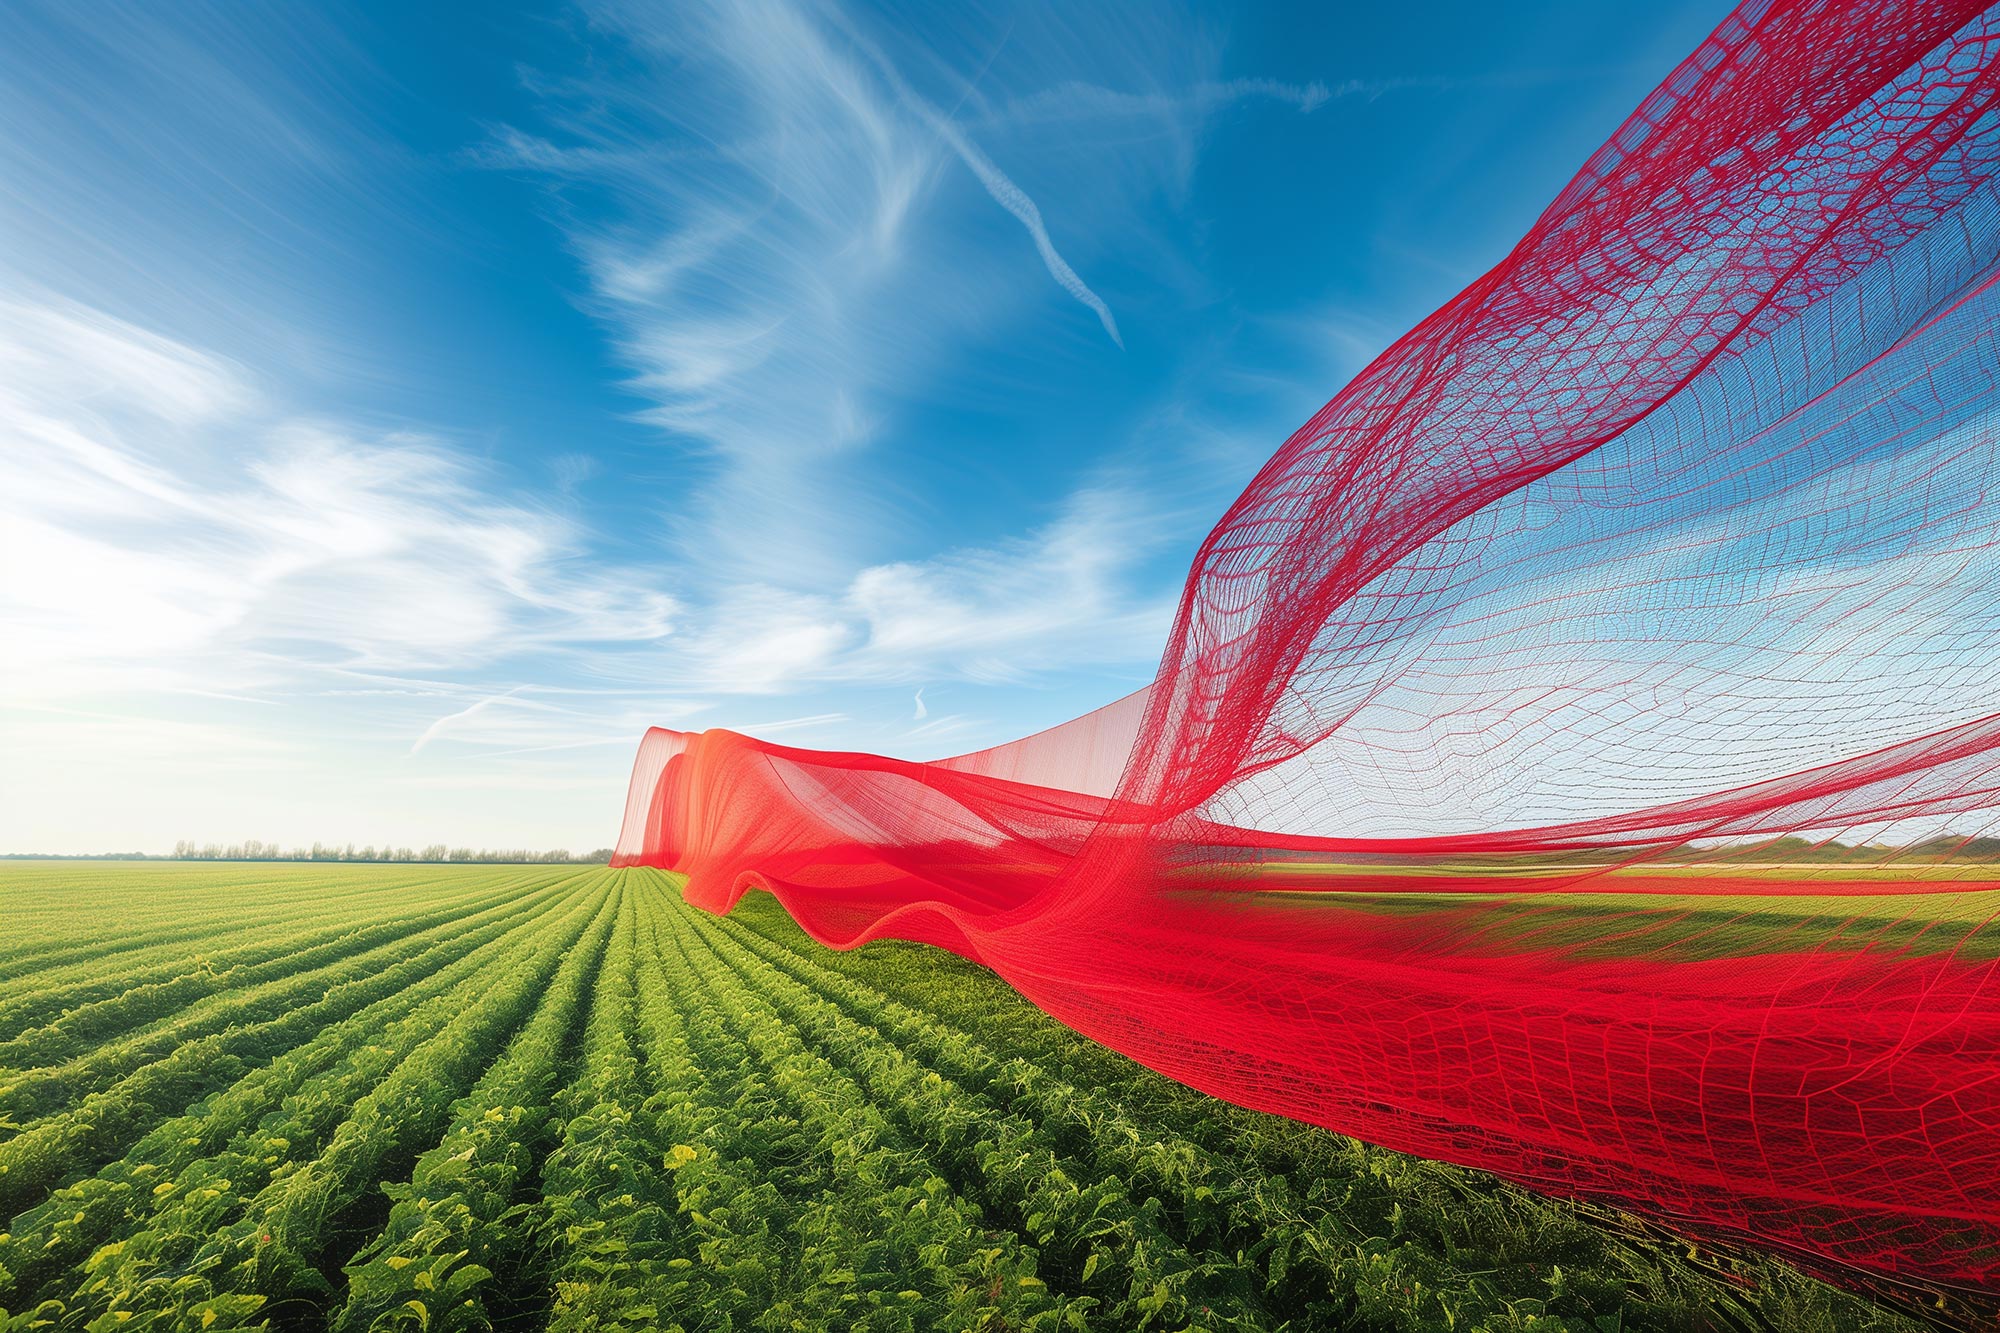 https://scitechdaily.com/images/Red-Net-Over-Farm-Field.jpg